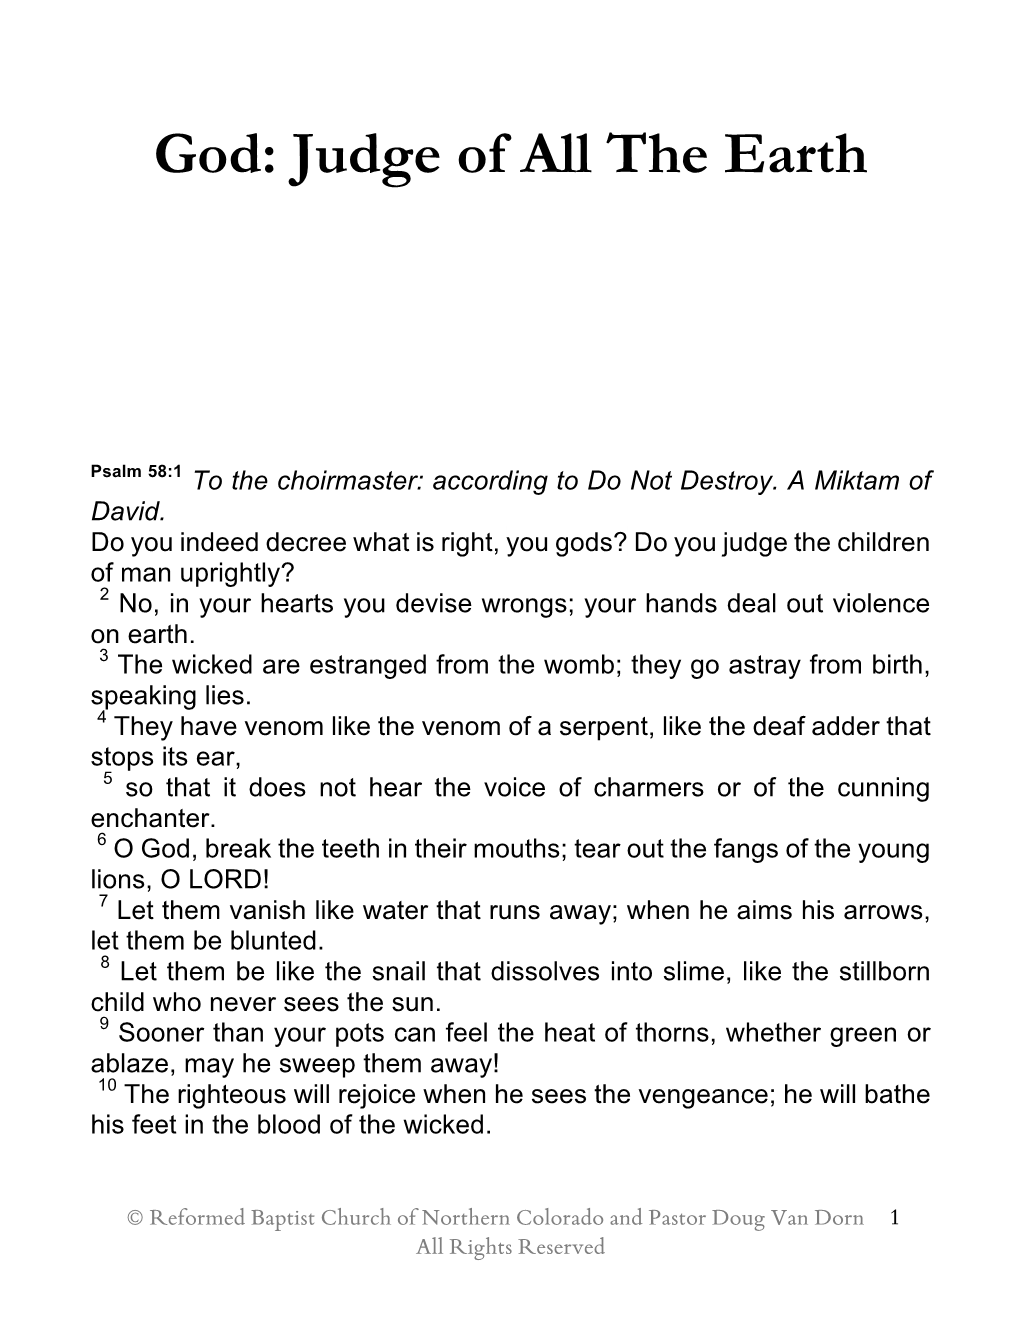 God: Judge of All the Earth